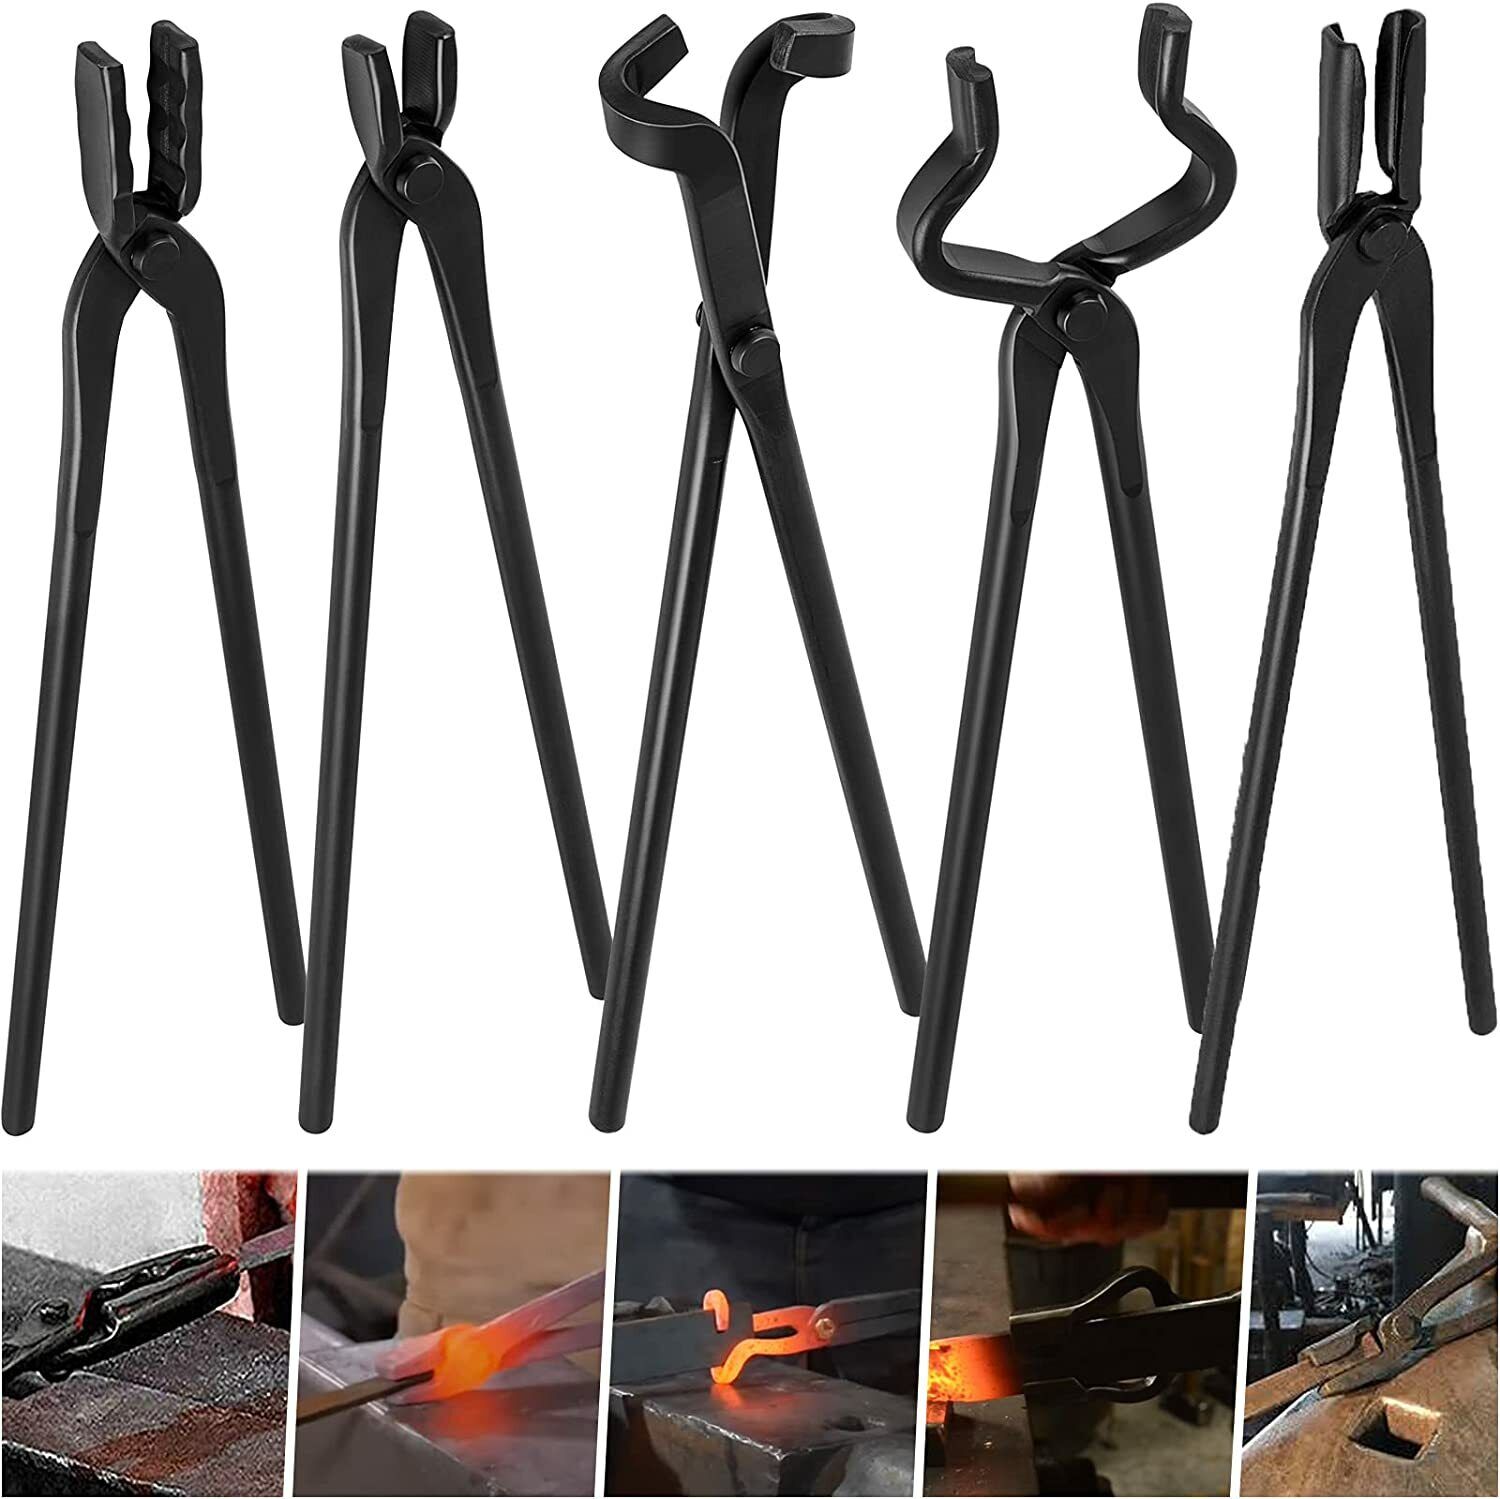 5PC Knife Making Tongs Set Bladesmith Blacksmith Tongs Tool for Anvil Vise Forge